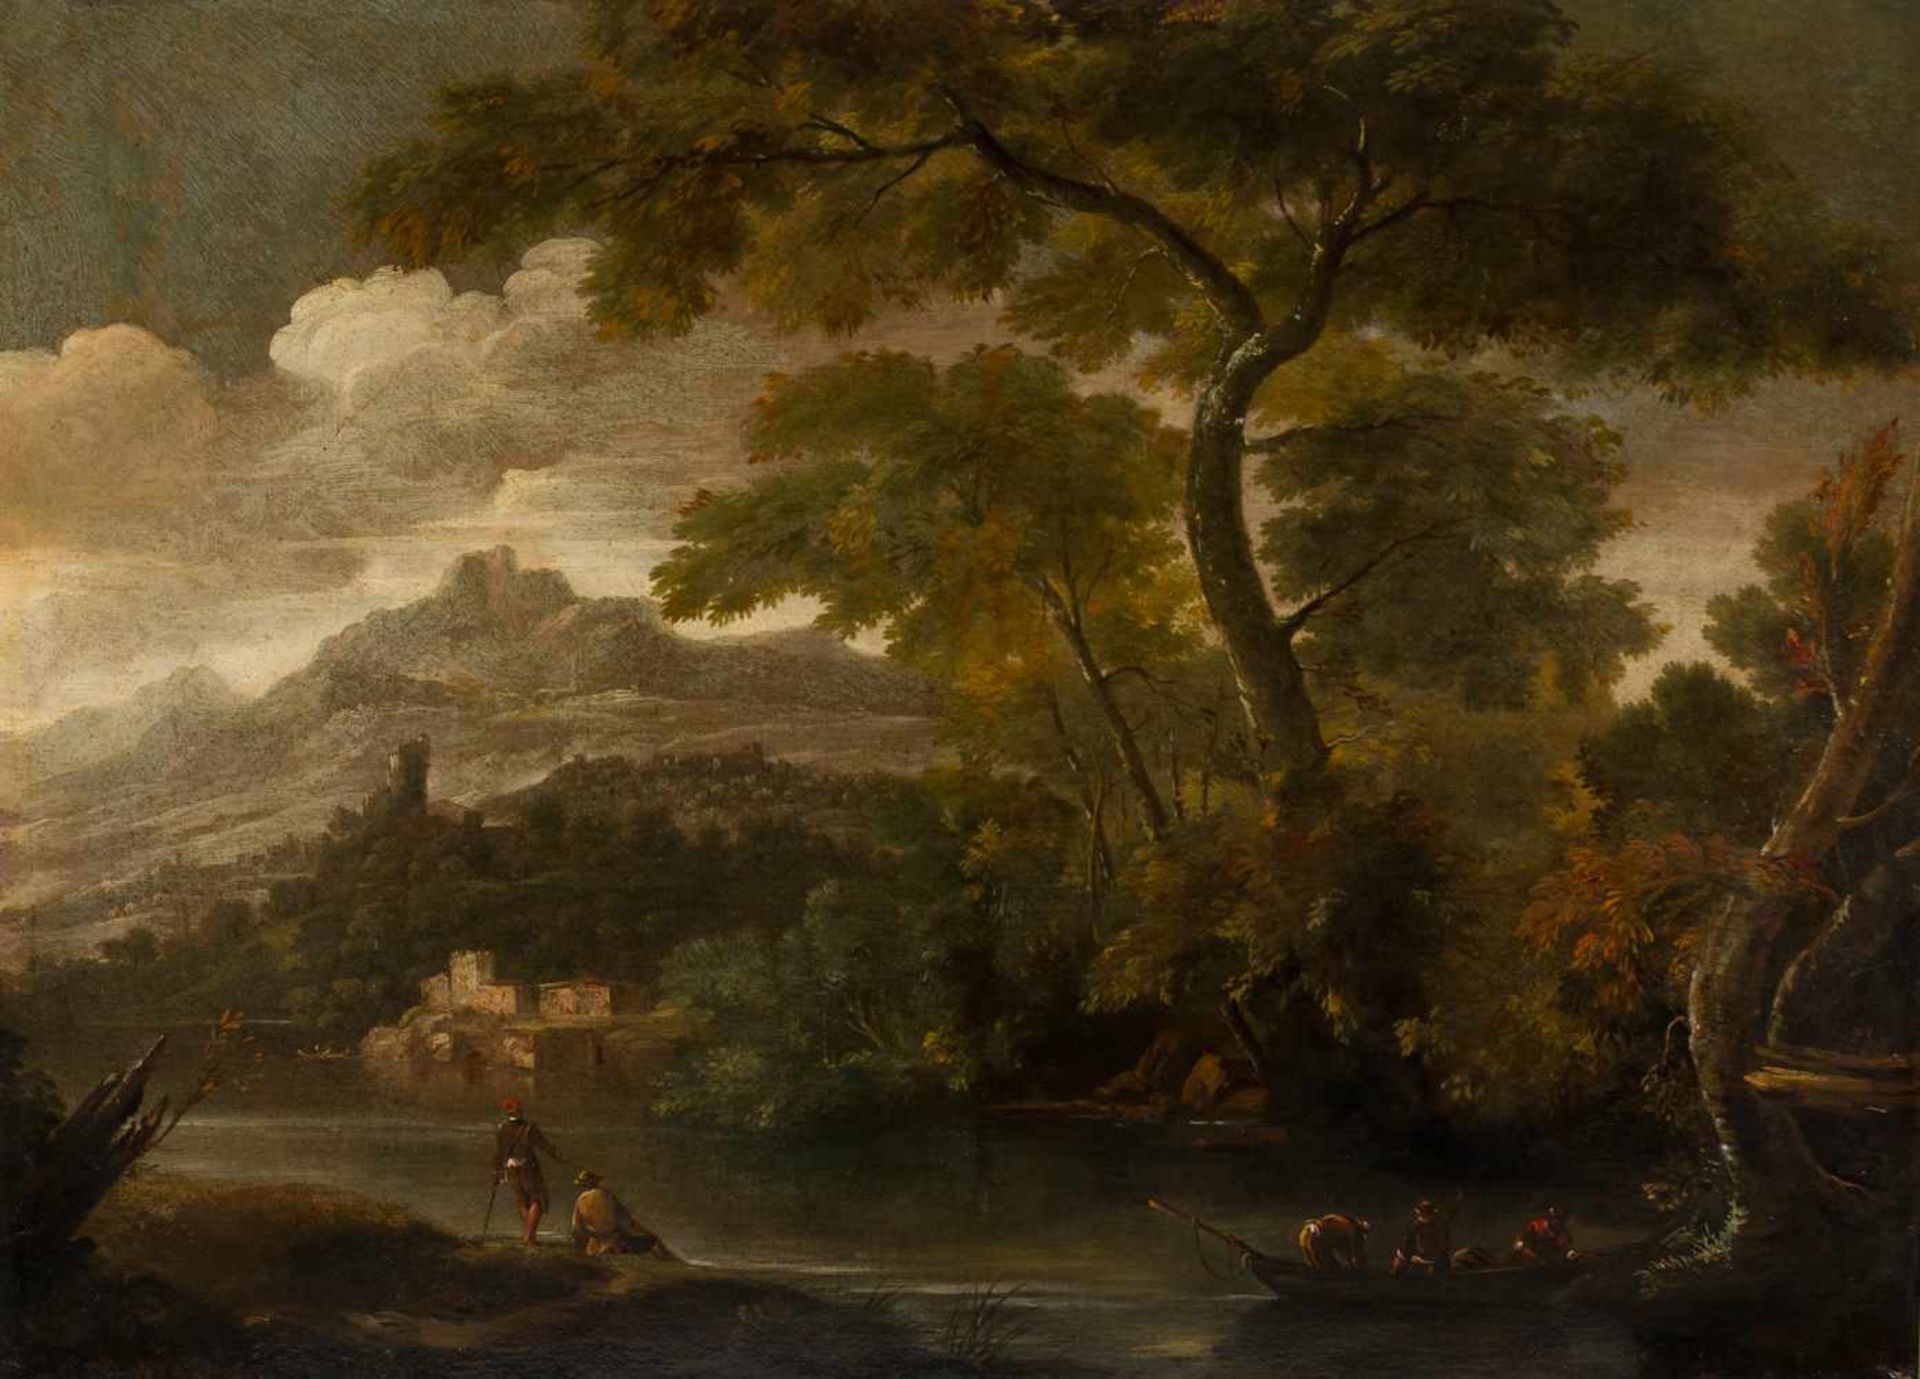 Attributed to Gaspard Dughet (Rome, 1615 - 1675)"Landscape with river"Oil on canvas. 90 x 125 cm.